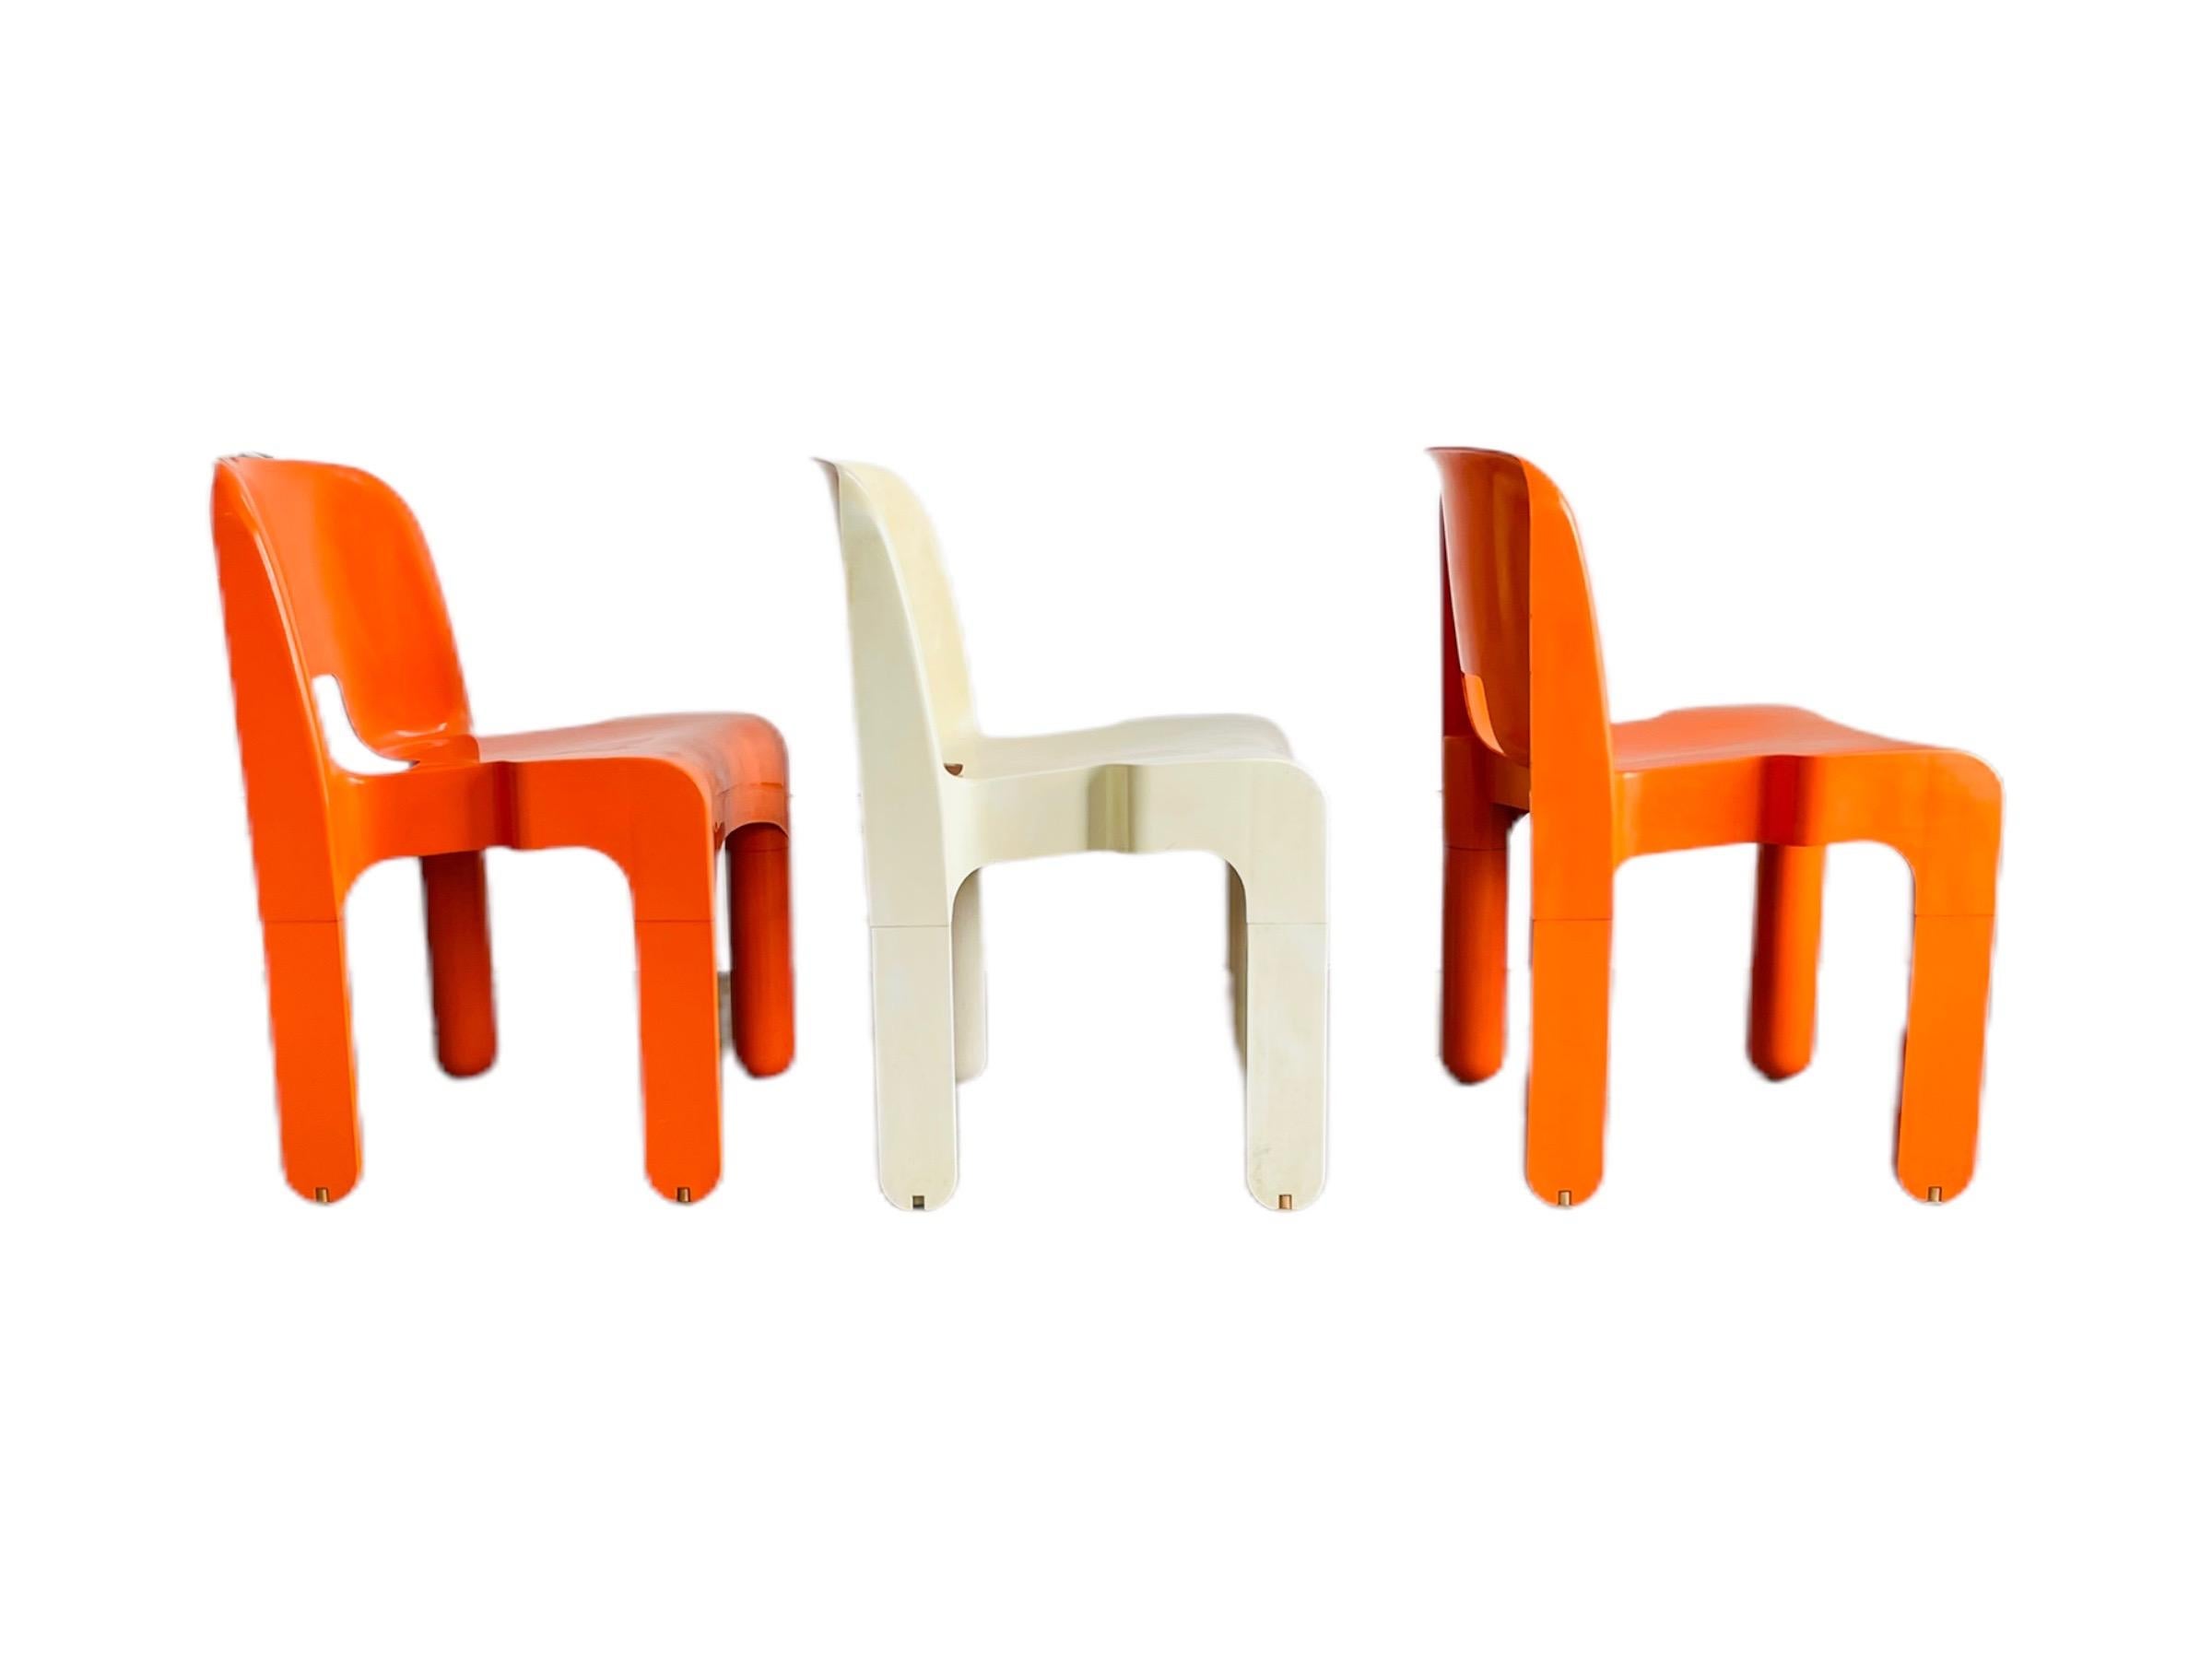 20th Century Set 3 Space Age Stacking Chairs by Joe Colombo 1967 Italy For Sale